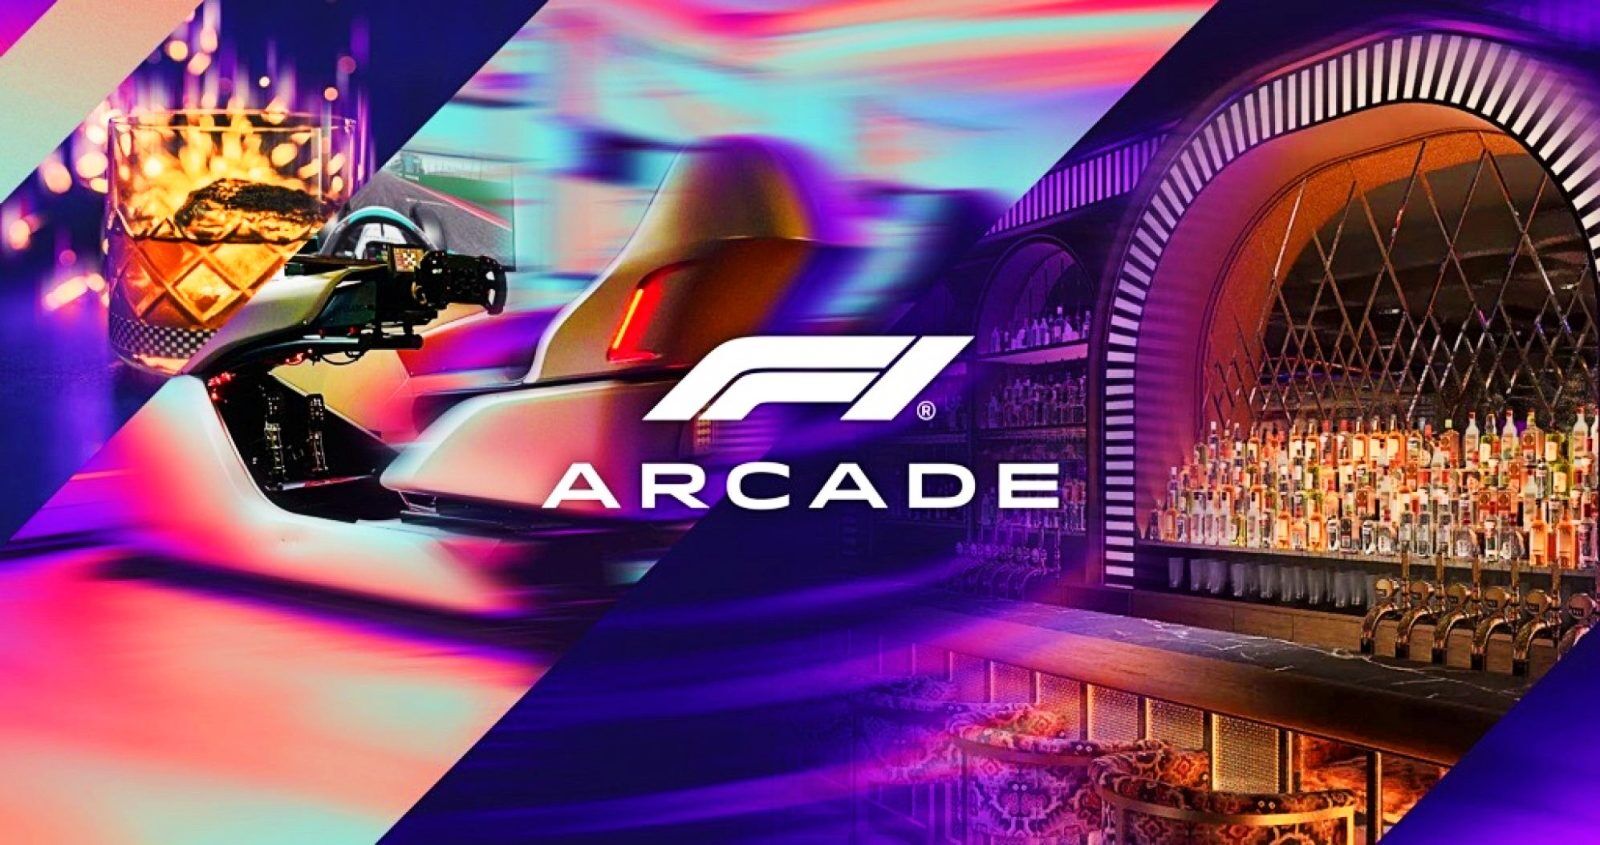 The F1 logo with Arcade written beneath it with a sim rig and a bunch of alcoholic drinks behind it.